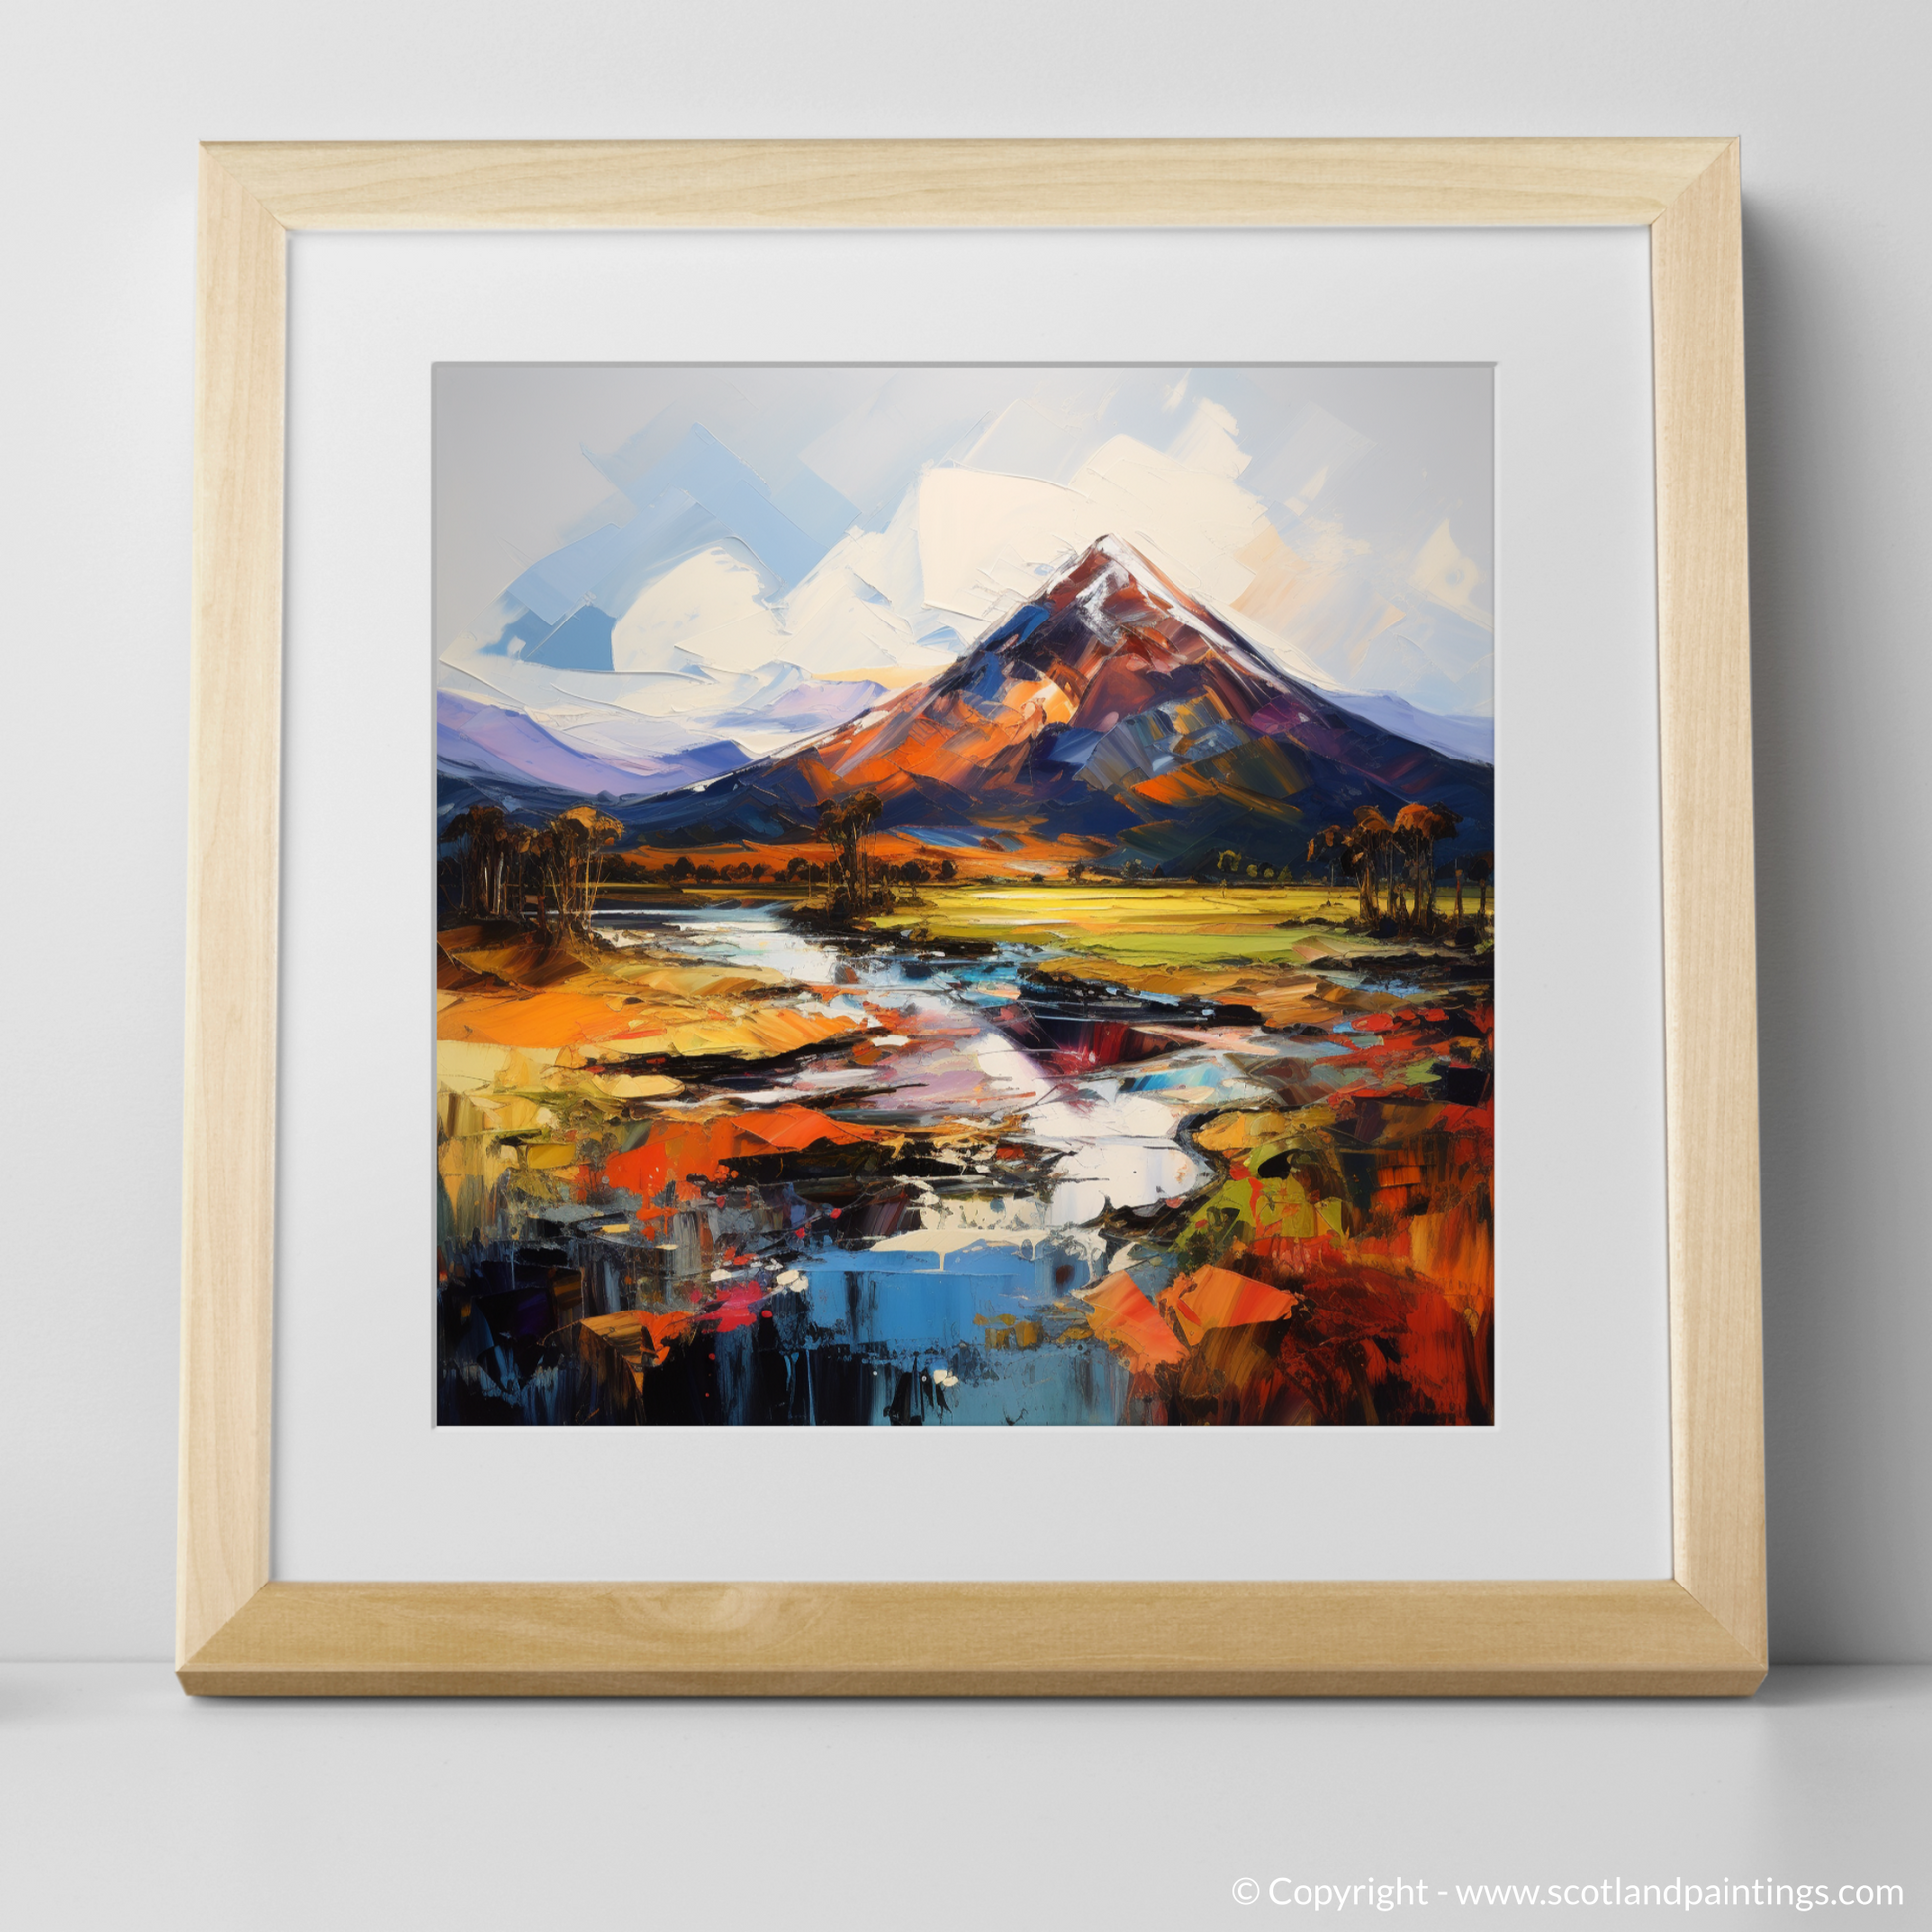 Art Print of Schiehallion, Perth and Kinross with a natural frame